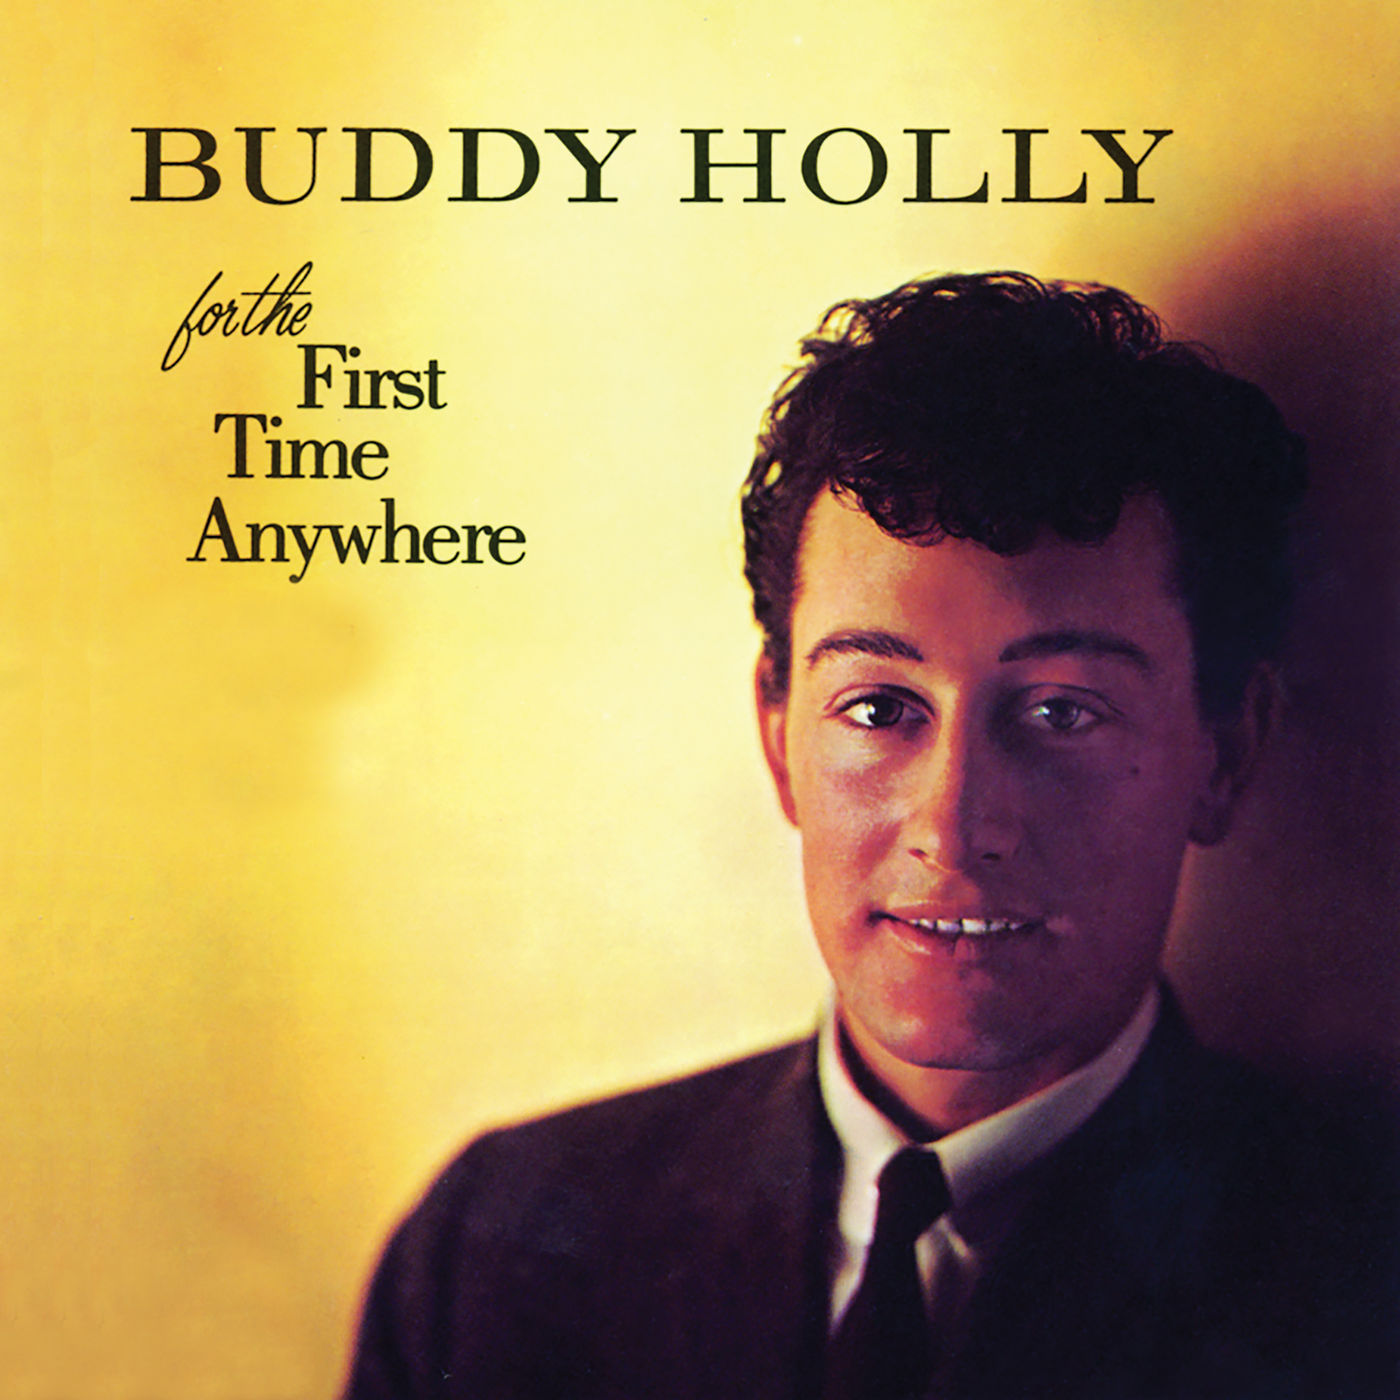 Buddy Holly – For The First Time Anywhere (1983/2021) [FLAC 24bit/192kHz]